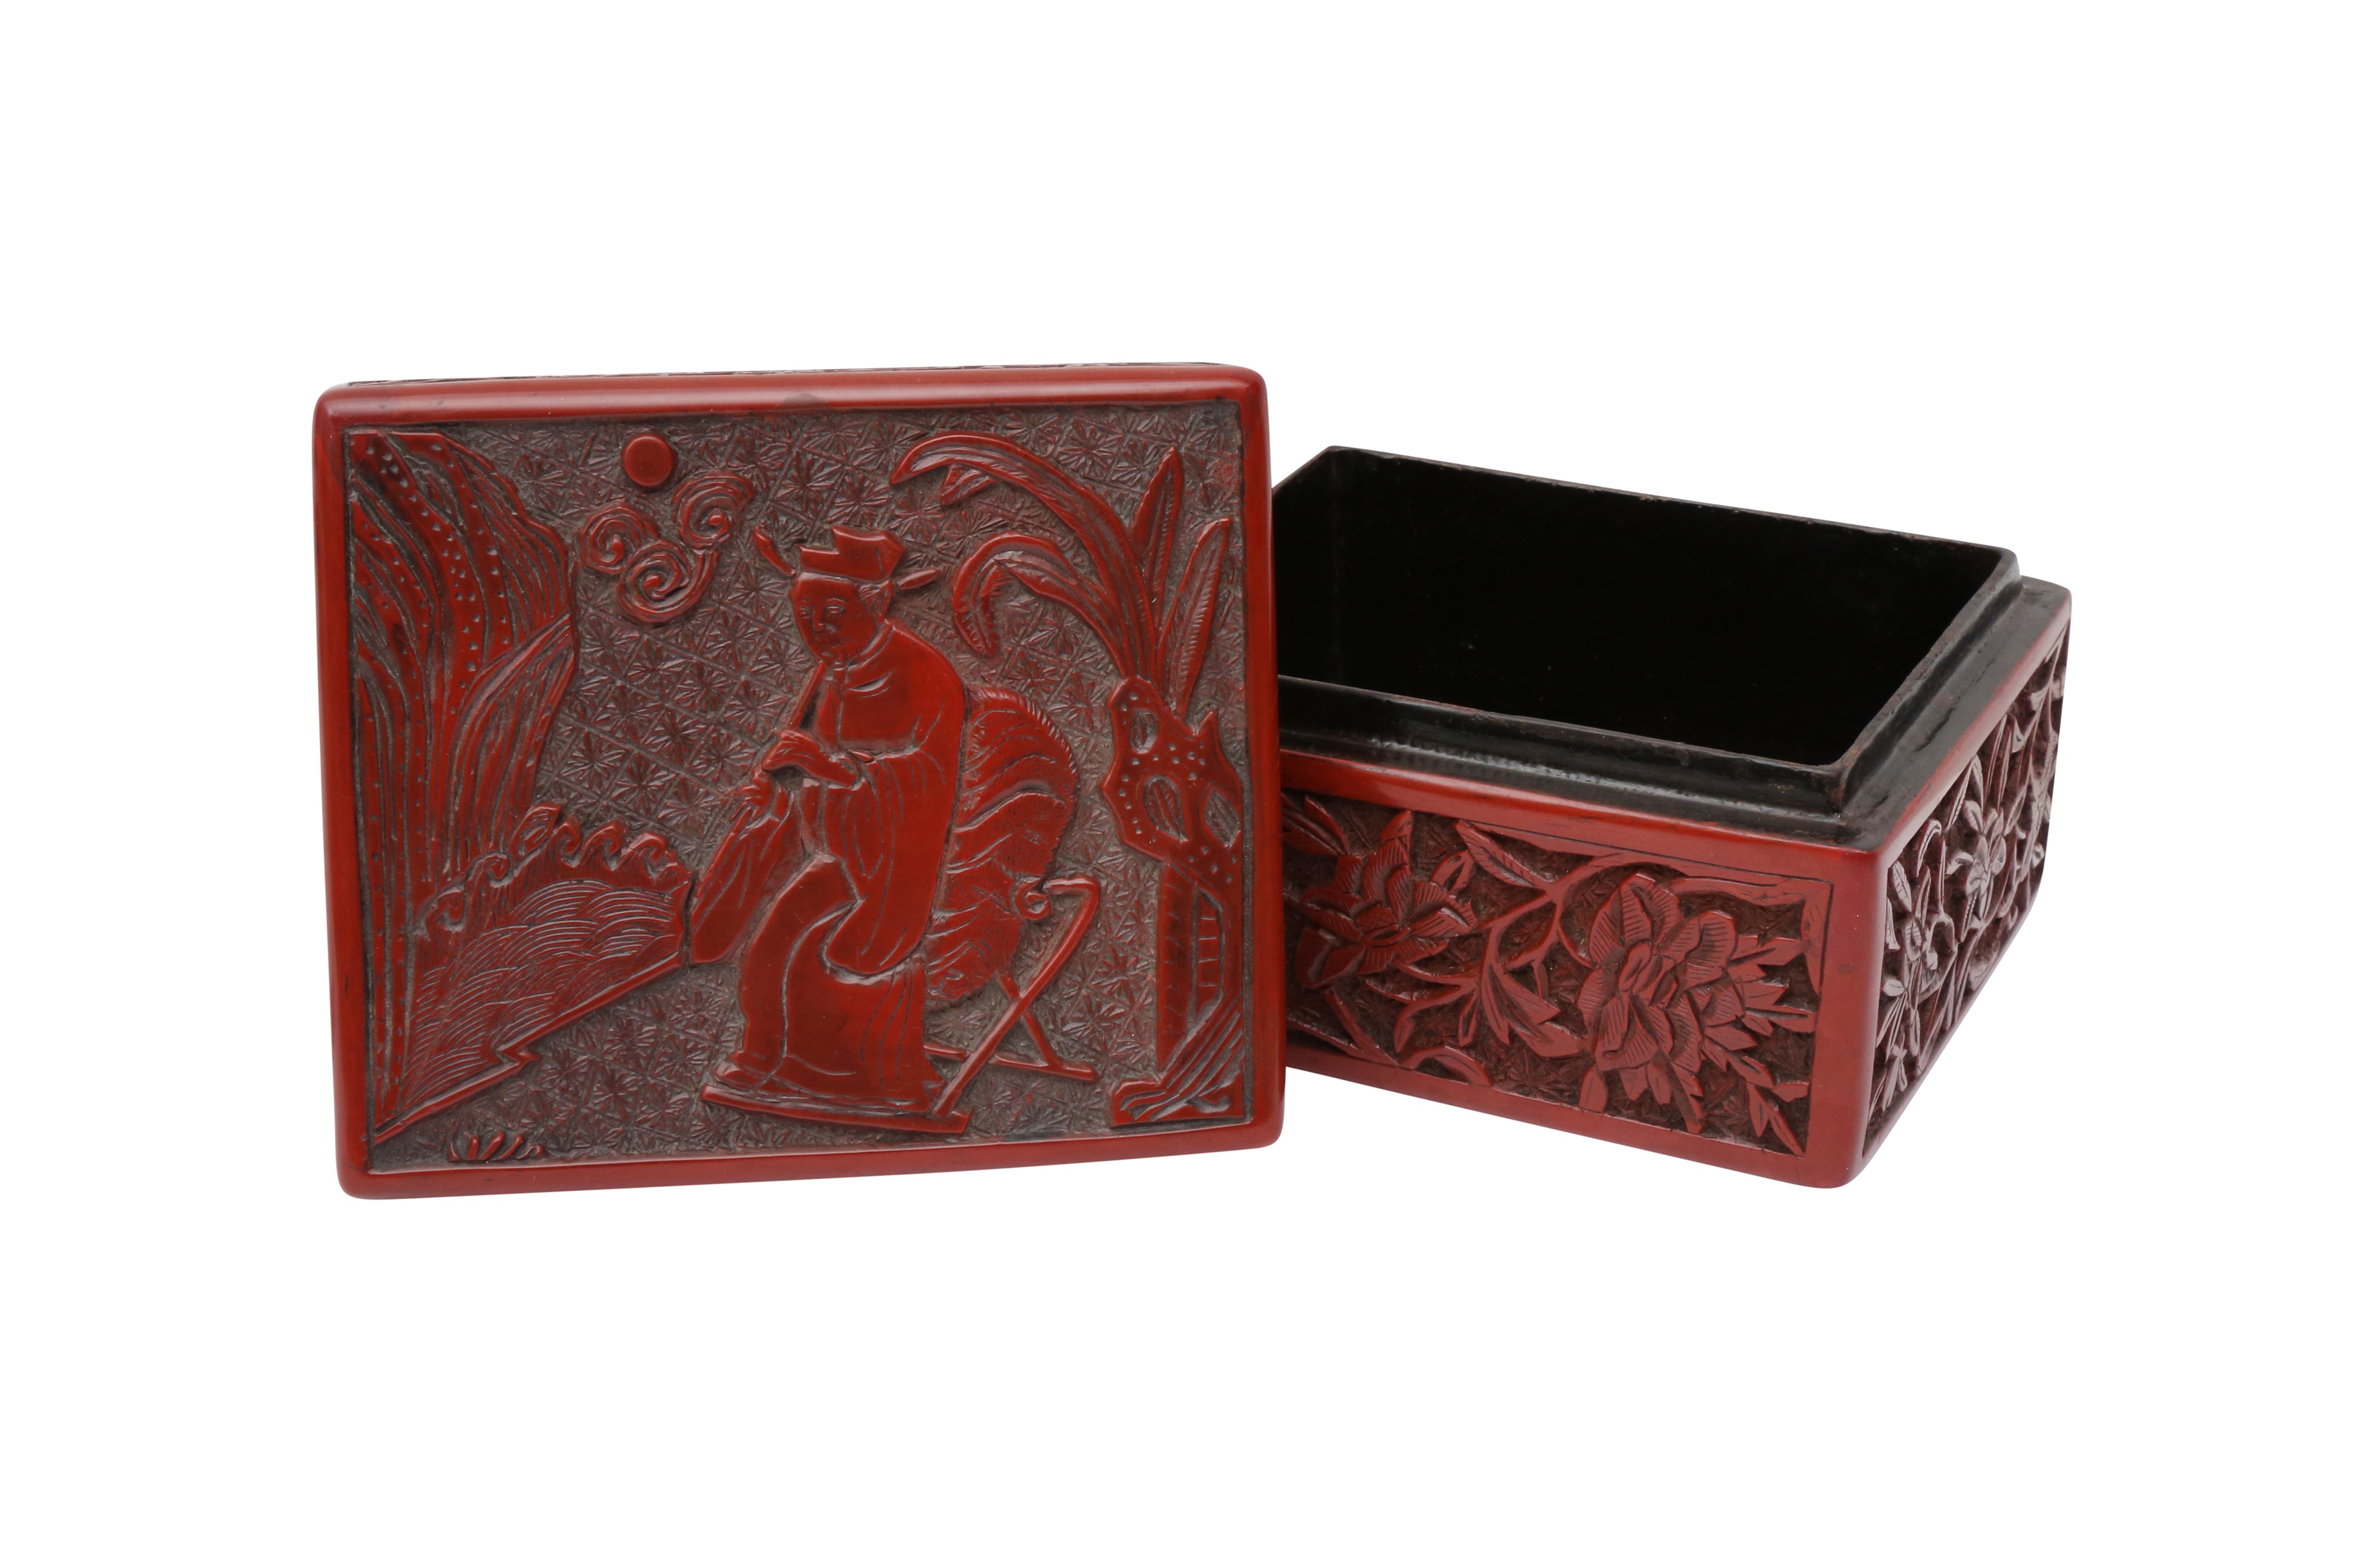 A CHINESE CINNABAR LACQUER 'MUSICIAN' BOX AND COVER 晚明 剔紅圖高士行樂圖紋蓋盒 - Image 2 of 20